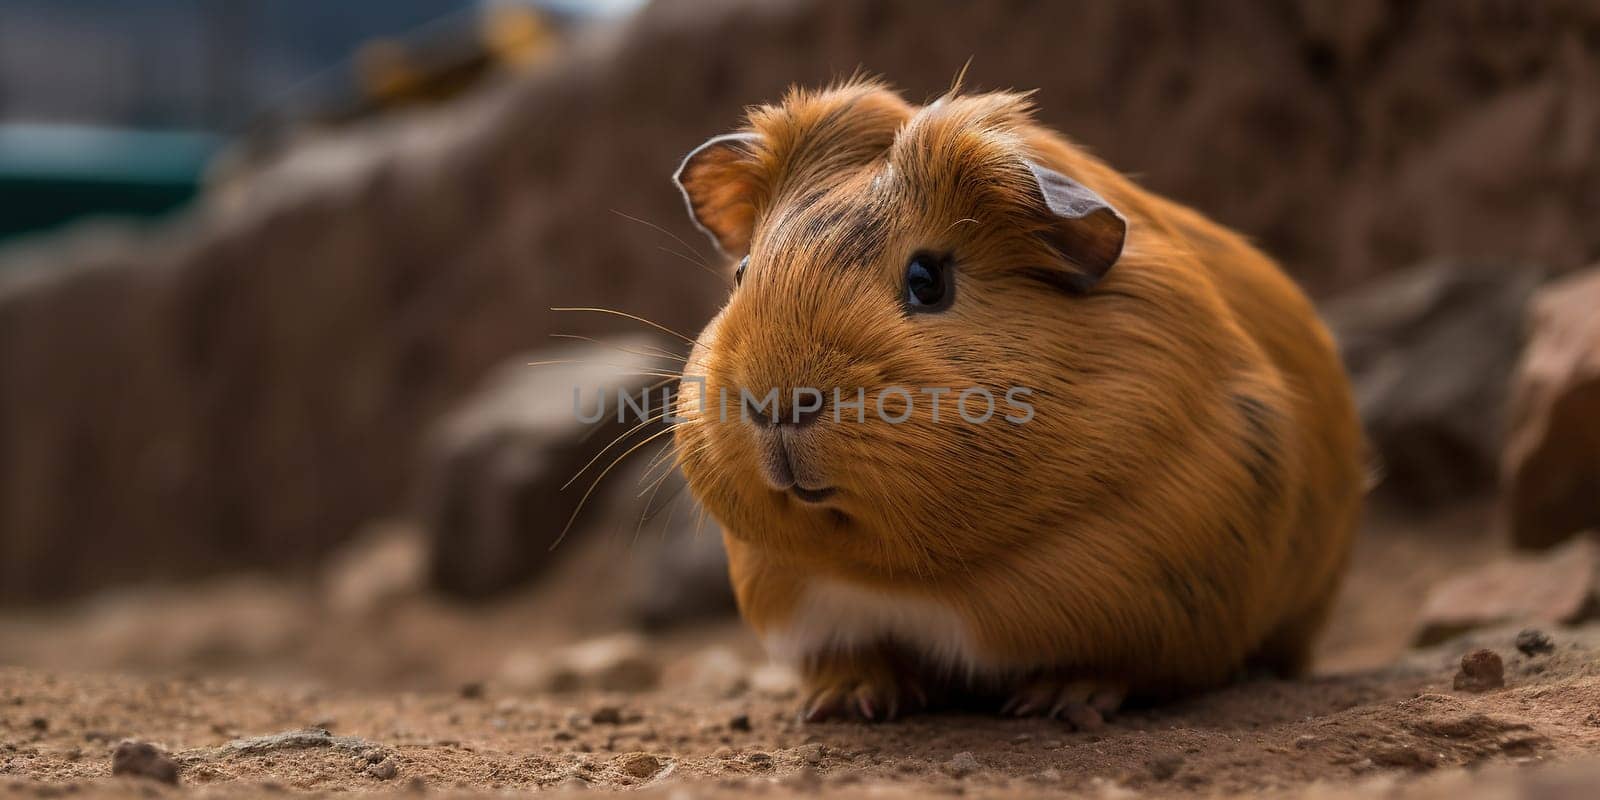 Cute Guinea Pig On A Grind, Close Up At Sunset